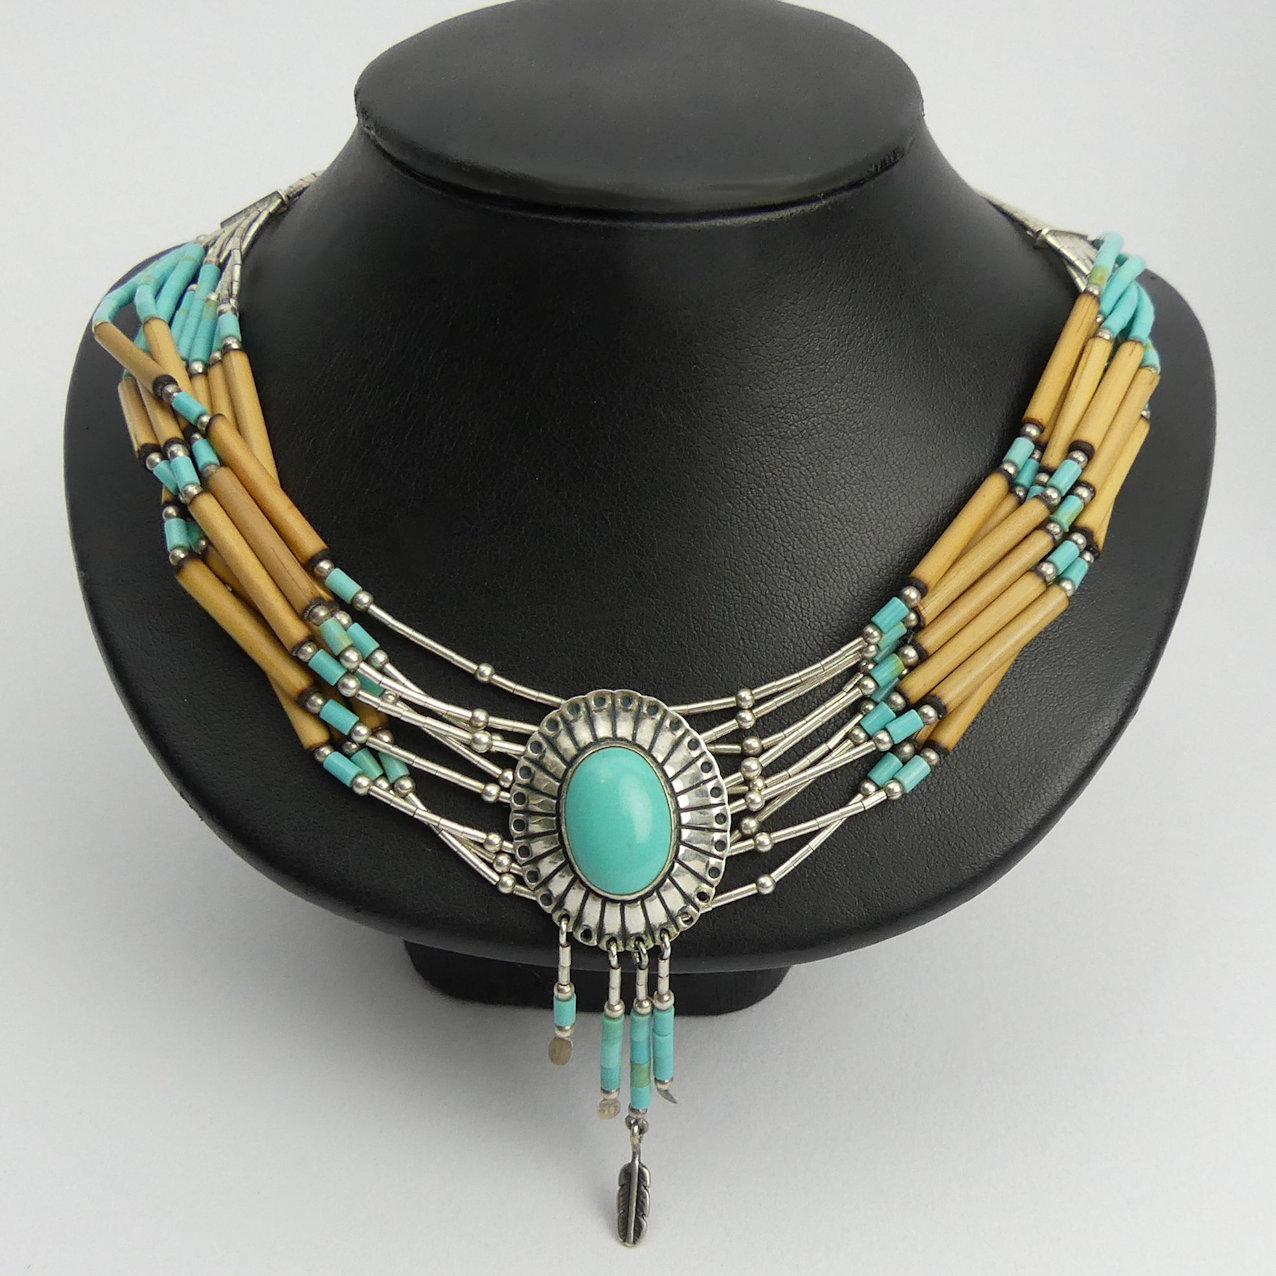 Native American sterling silver, turquoise and reed necklace, 19.4 grams, 39cm x 6cm. UK Postage £12